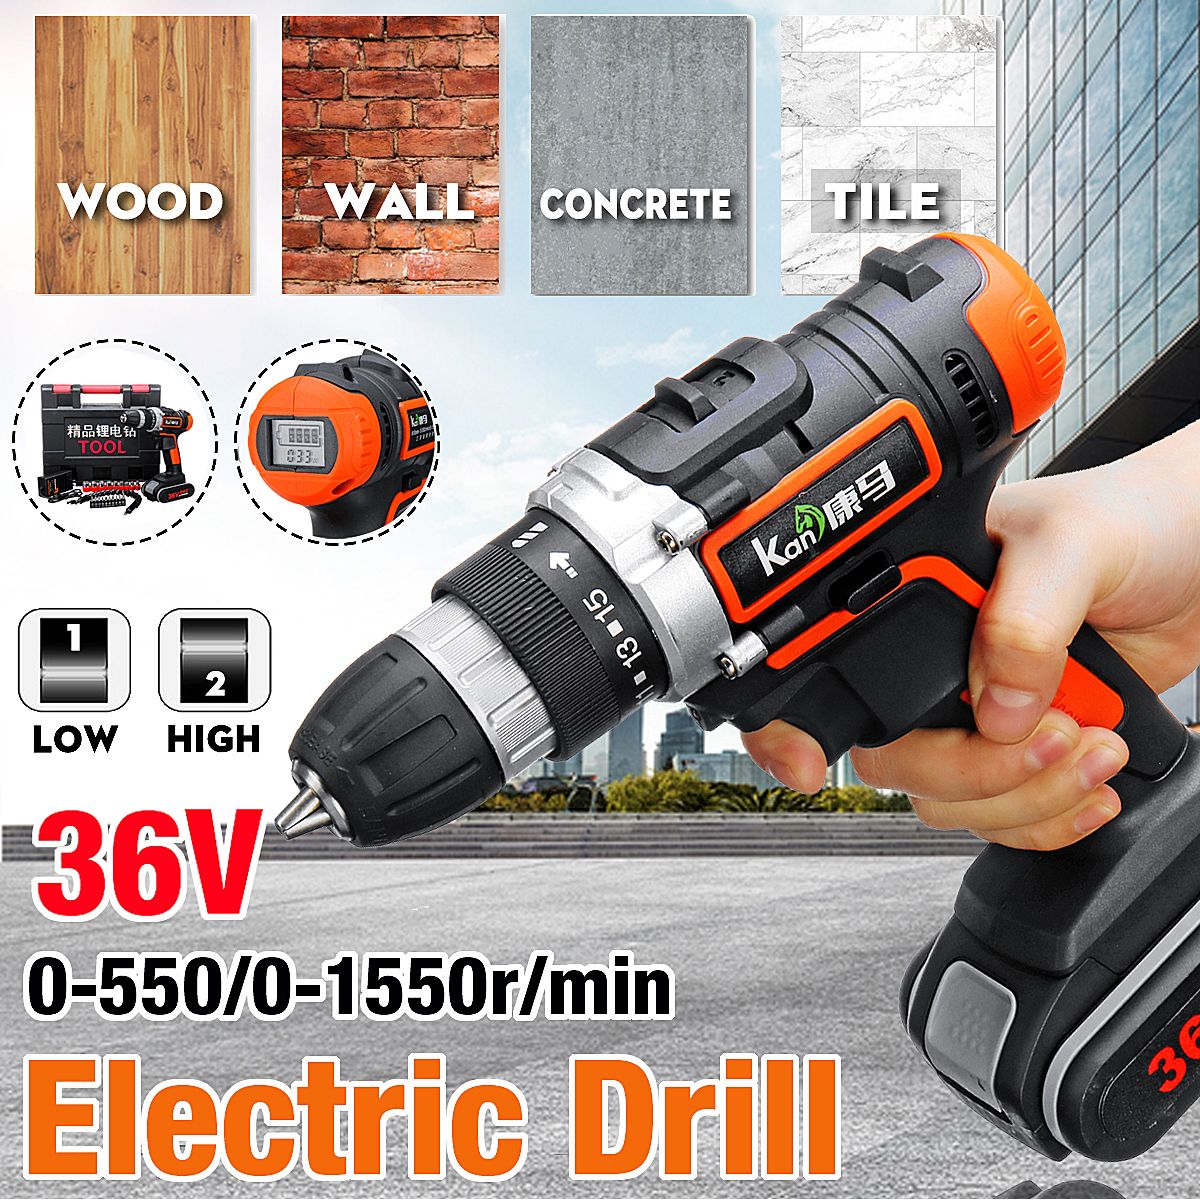 36V-Cordless-Power-Drills-Electricity-Display-Electric-Screwdriver-Lithium-Battery-Driver-Tool-With--1426538